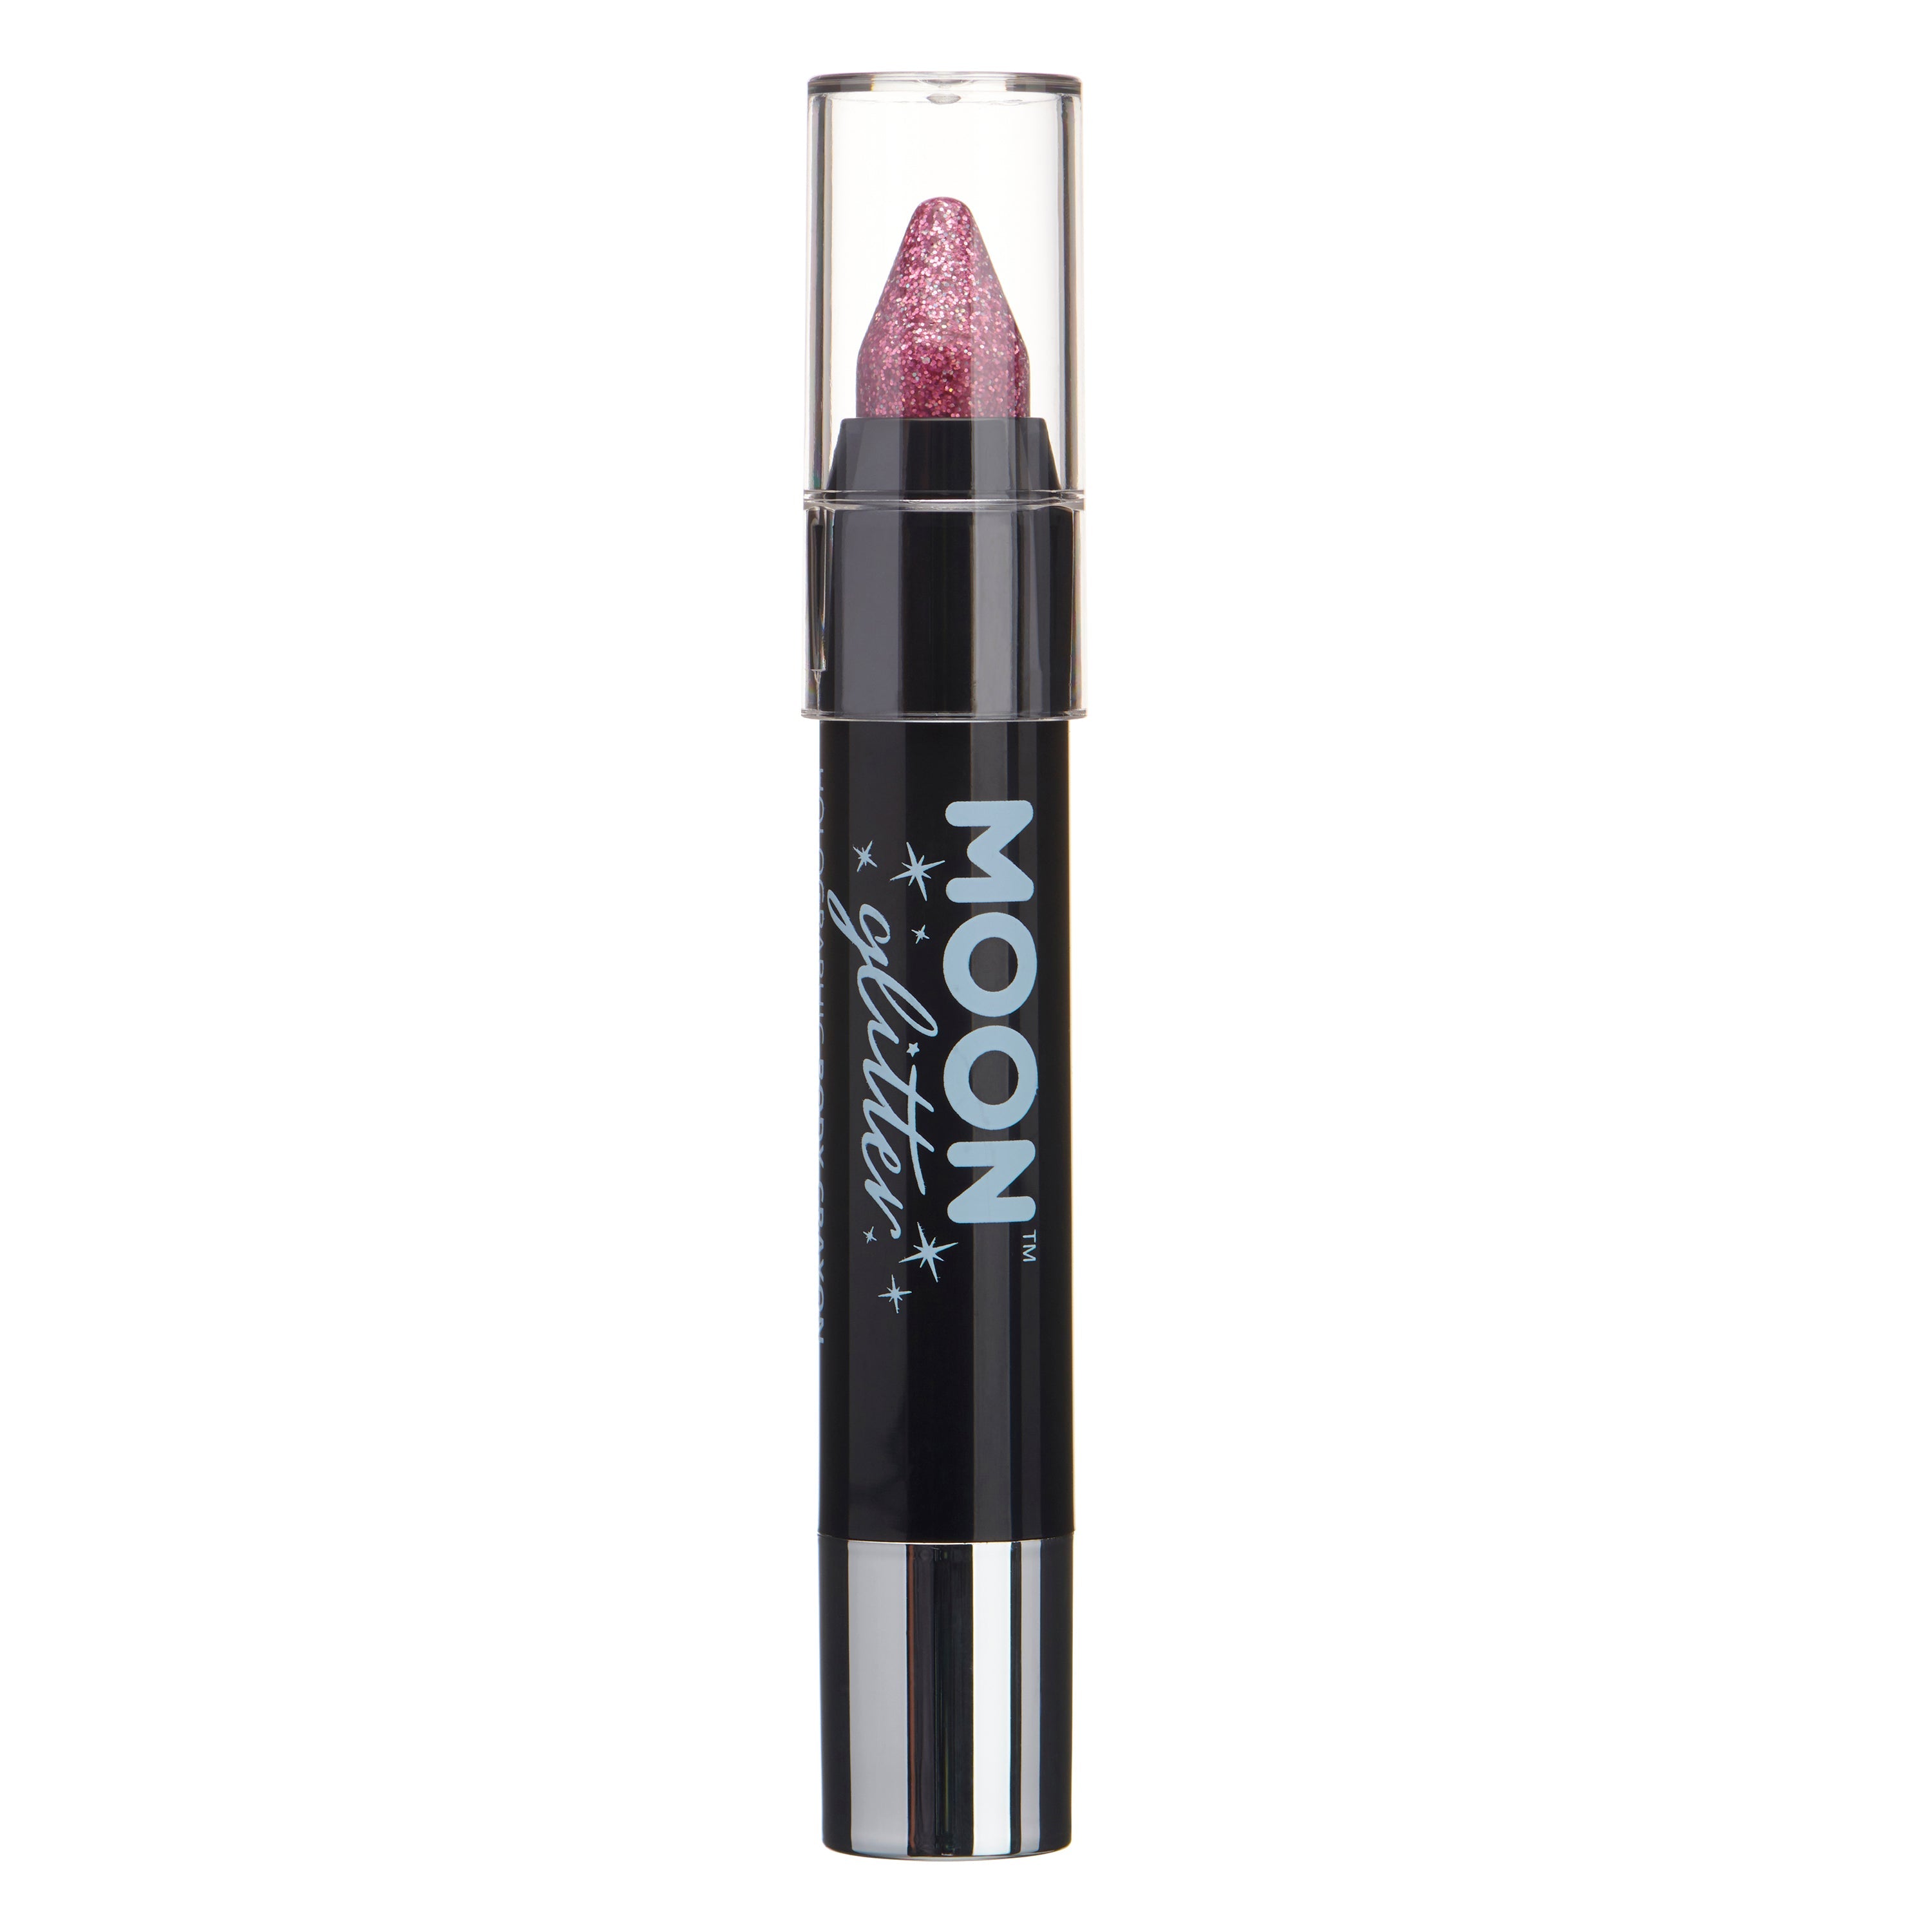 Pink - Holographic Glitter Face & Body Crayon, 3.5g. Cosmetically certified, FDA & Health Canada compliant and cruelty free.